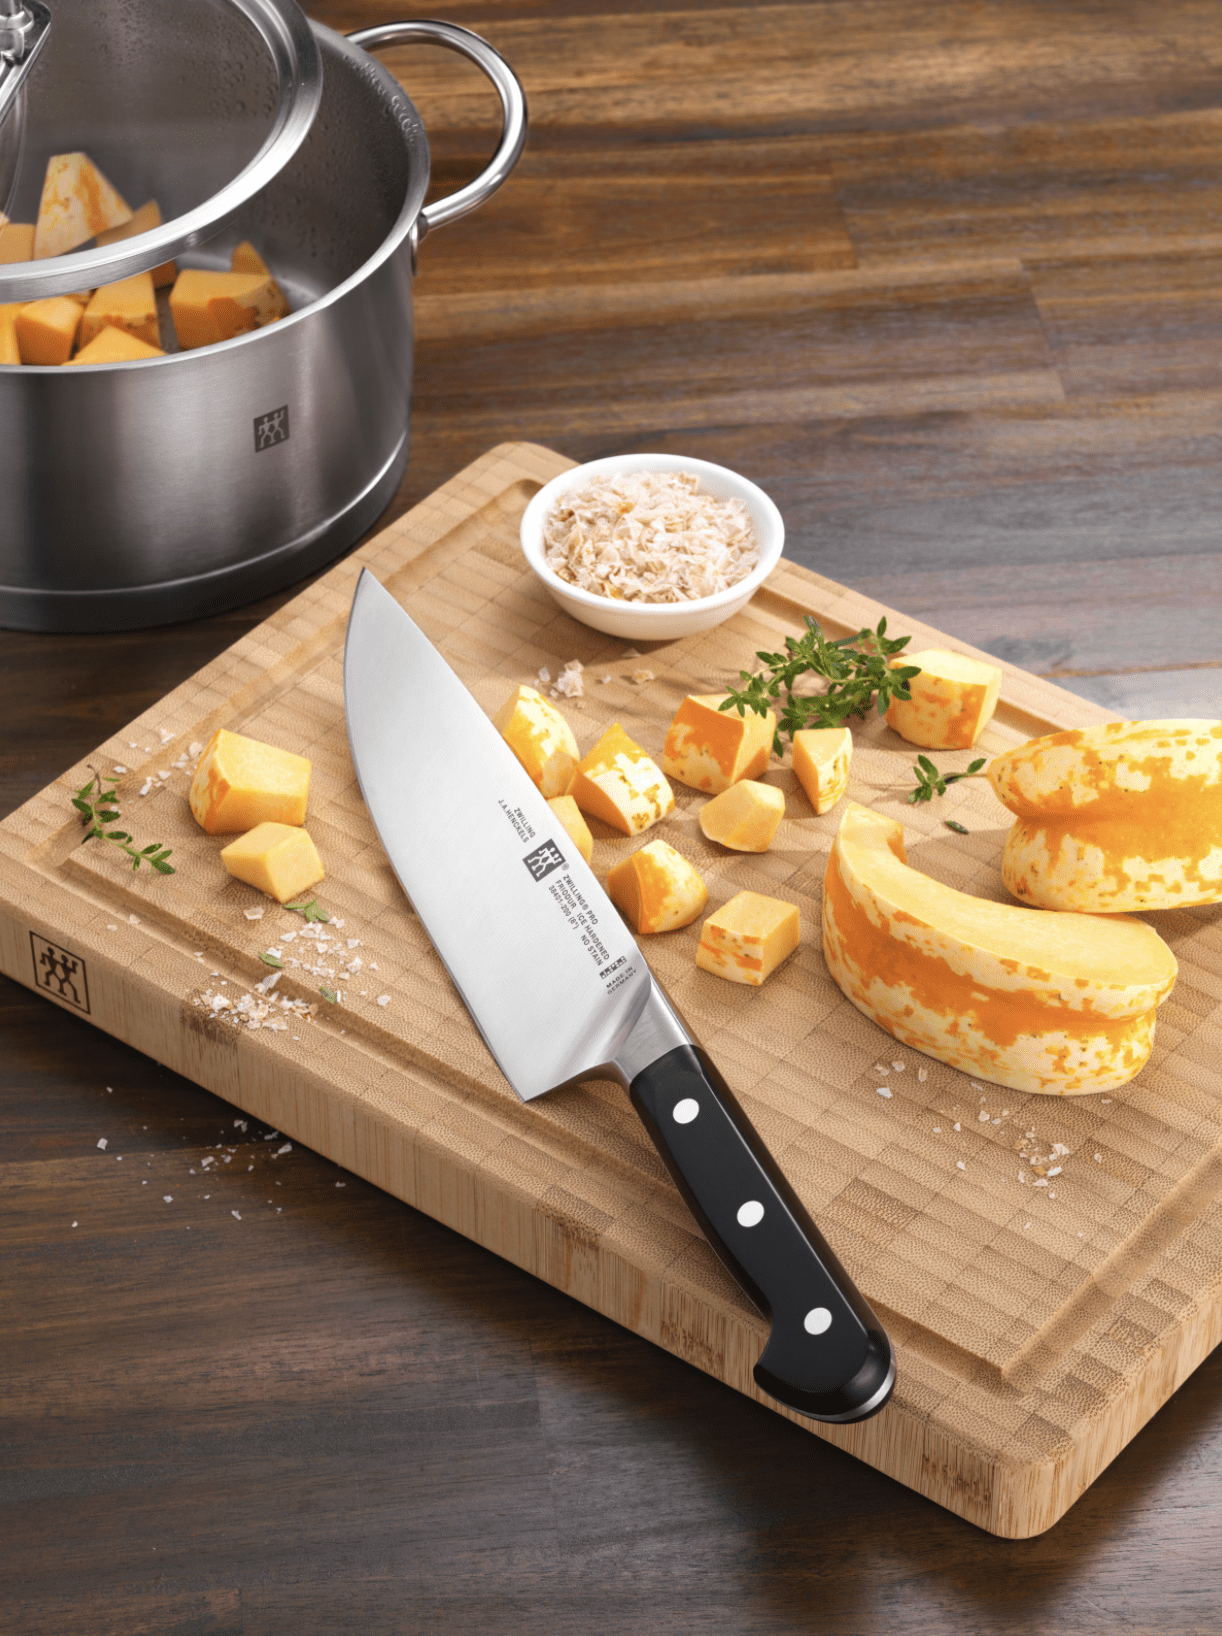 https://cdn.apartmenttherapy.info/image/upload/v1642611333/gen-workflow/product-database/Zwilling_Pro_7_22_Chef_s_Knife.png